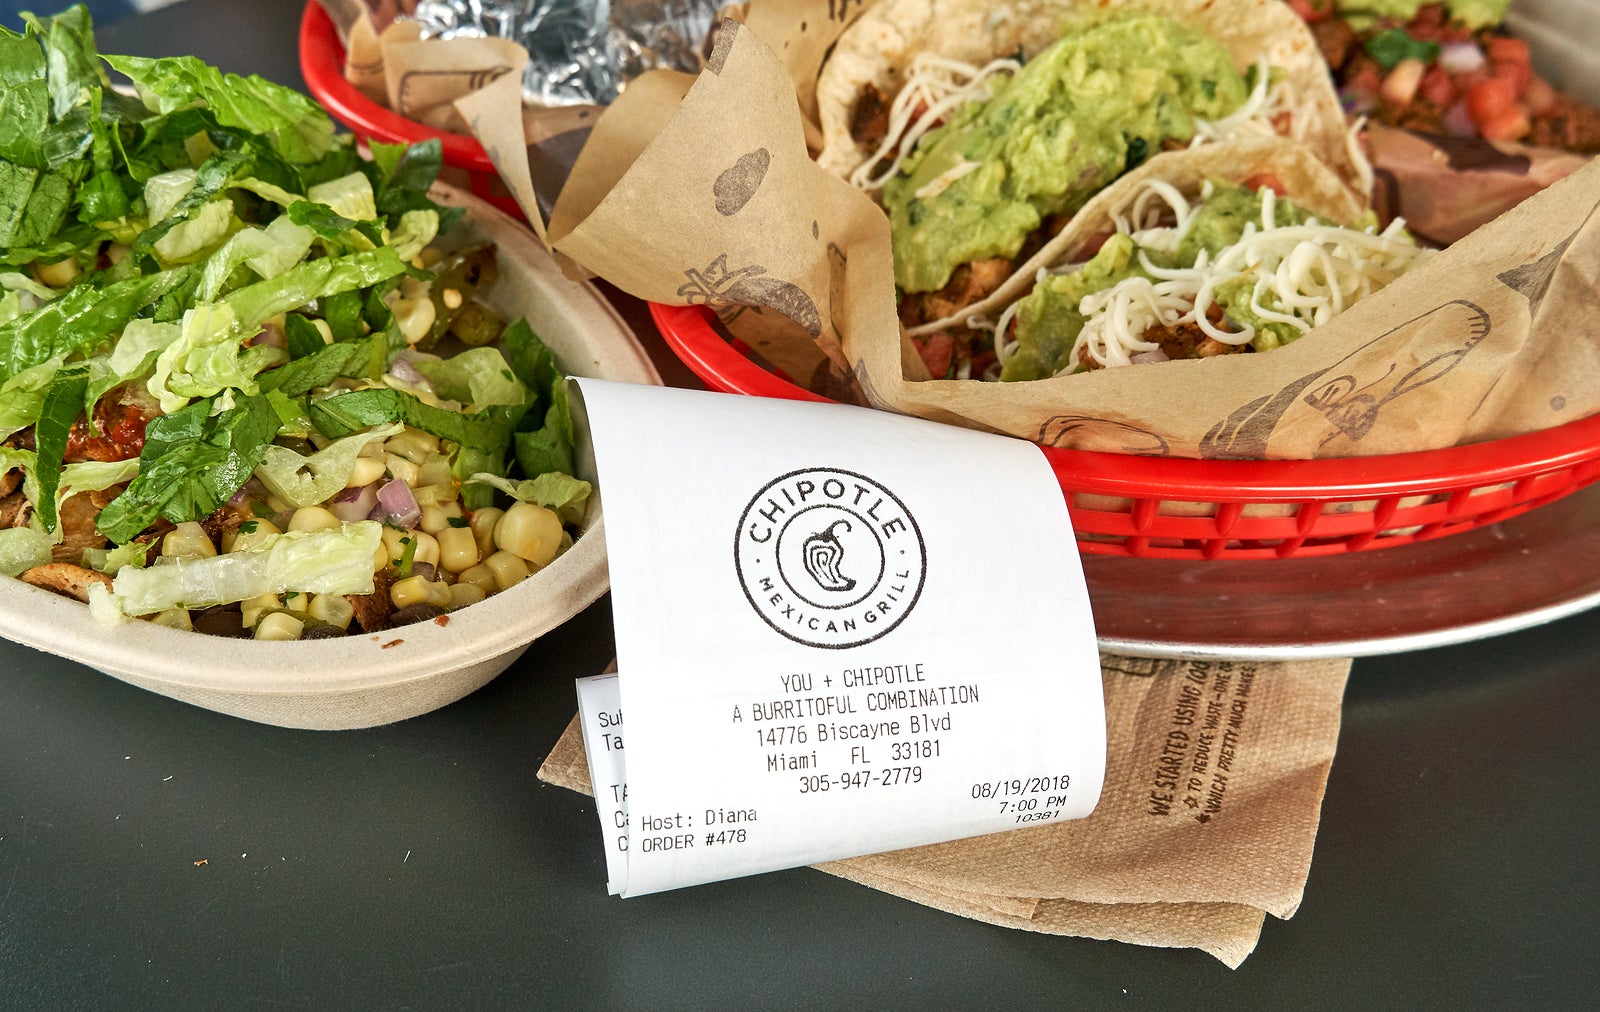 MIAMI, USA - AUGUST 22, 2018: Chipotle plate and receipt. Chipotle restaurant logo. Chipotle Mexican Grill is an American chain of fast casual restaurants